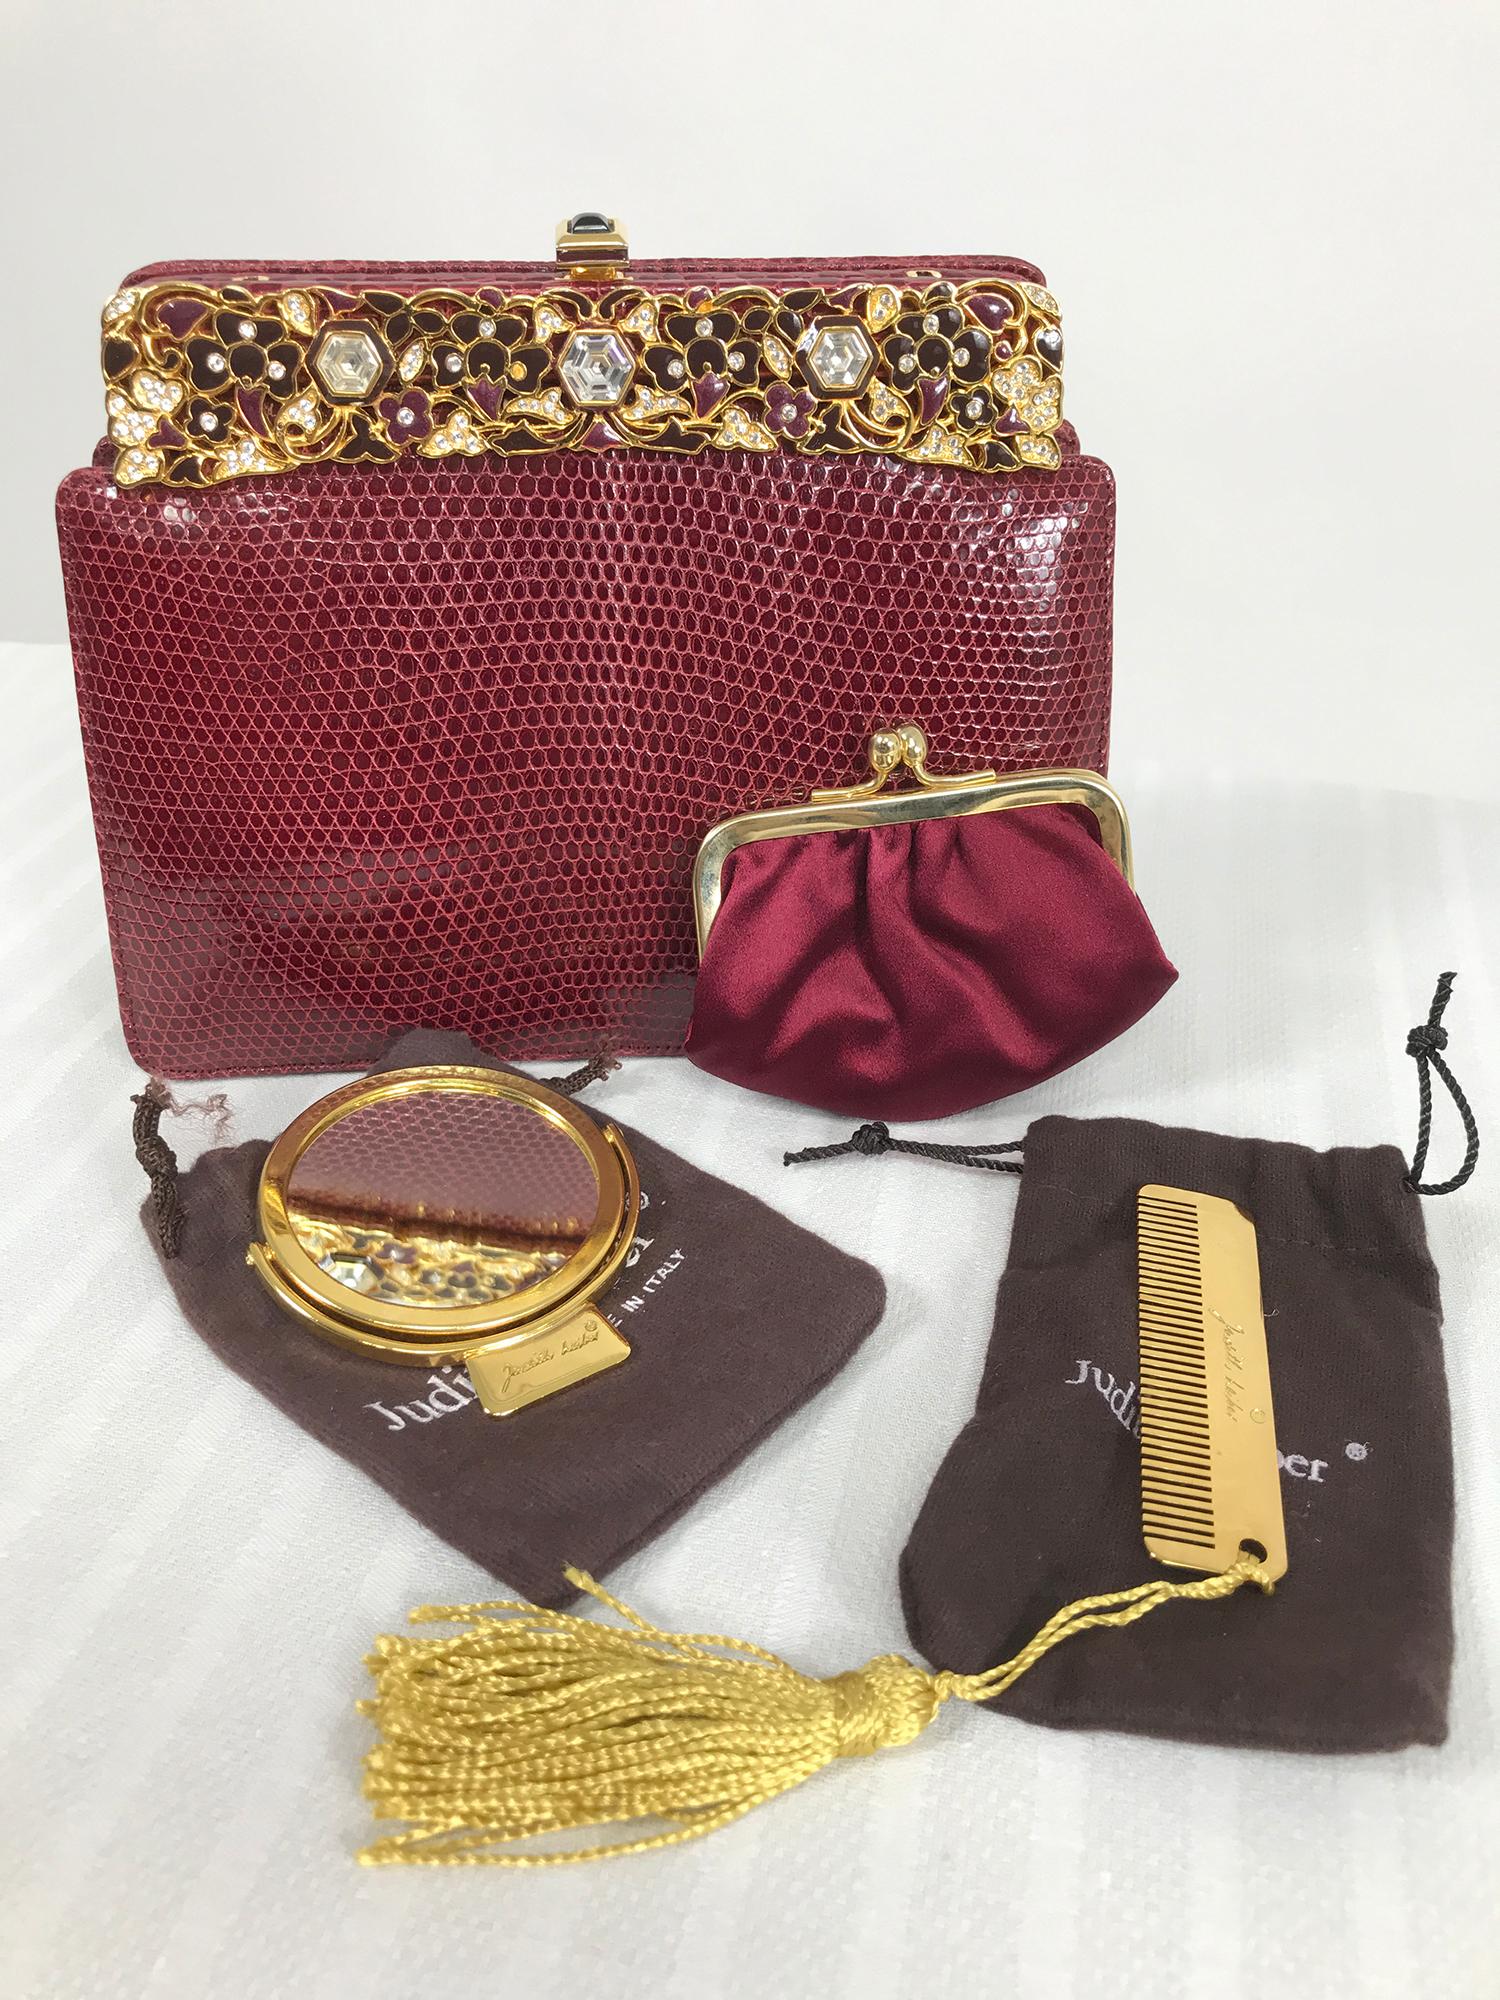 Judith Leiber jewel clasp, burgundy lizard clutch or shoulder bag with accessories, comb, mirror and change purse including protector bags and box. The bag is in beautiful condition, barely used. The frame is gold metal with shades of burgundy